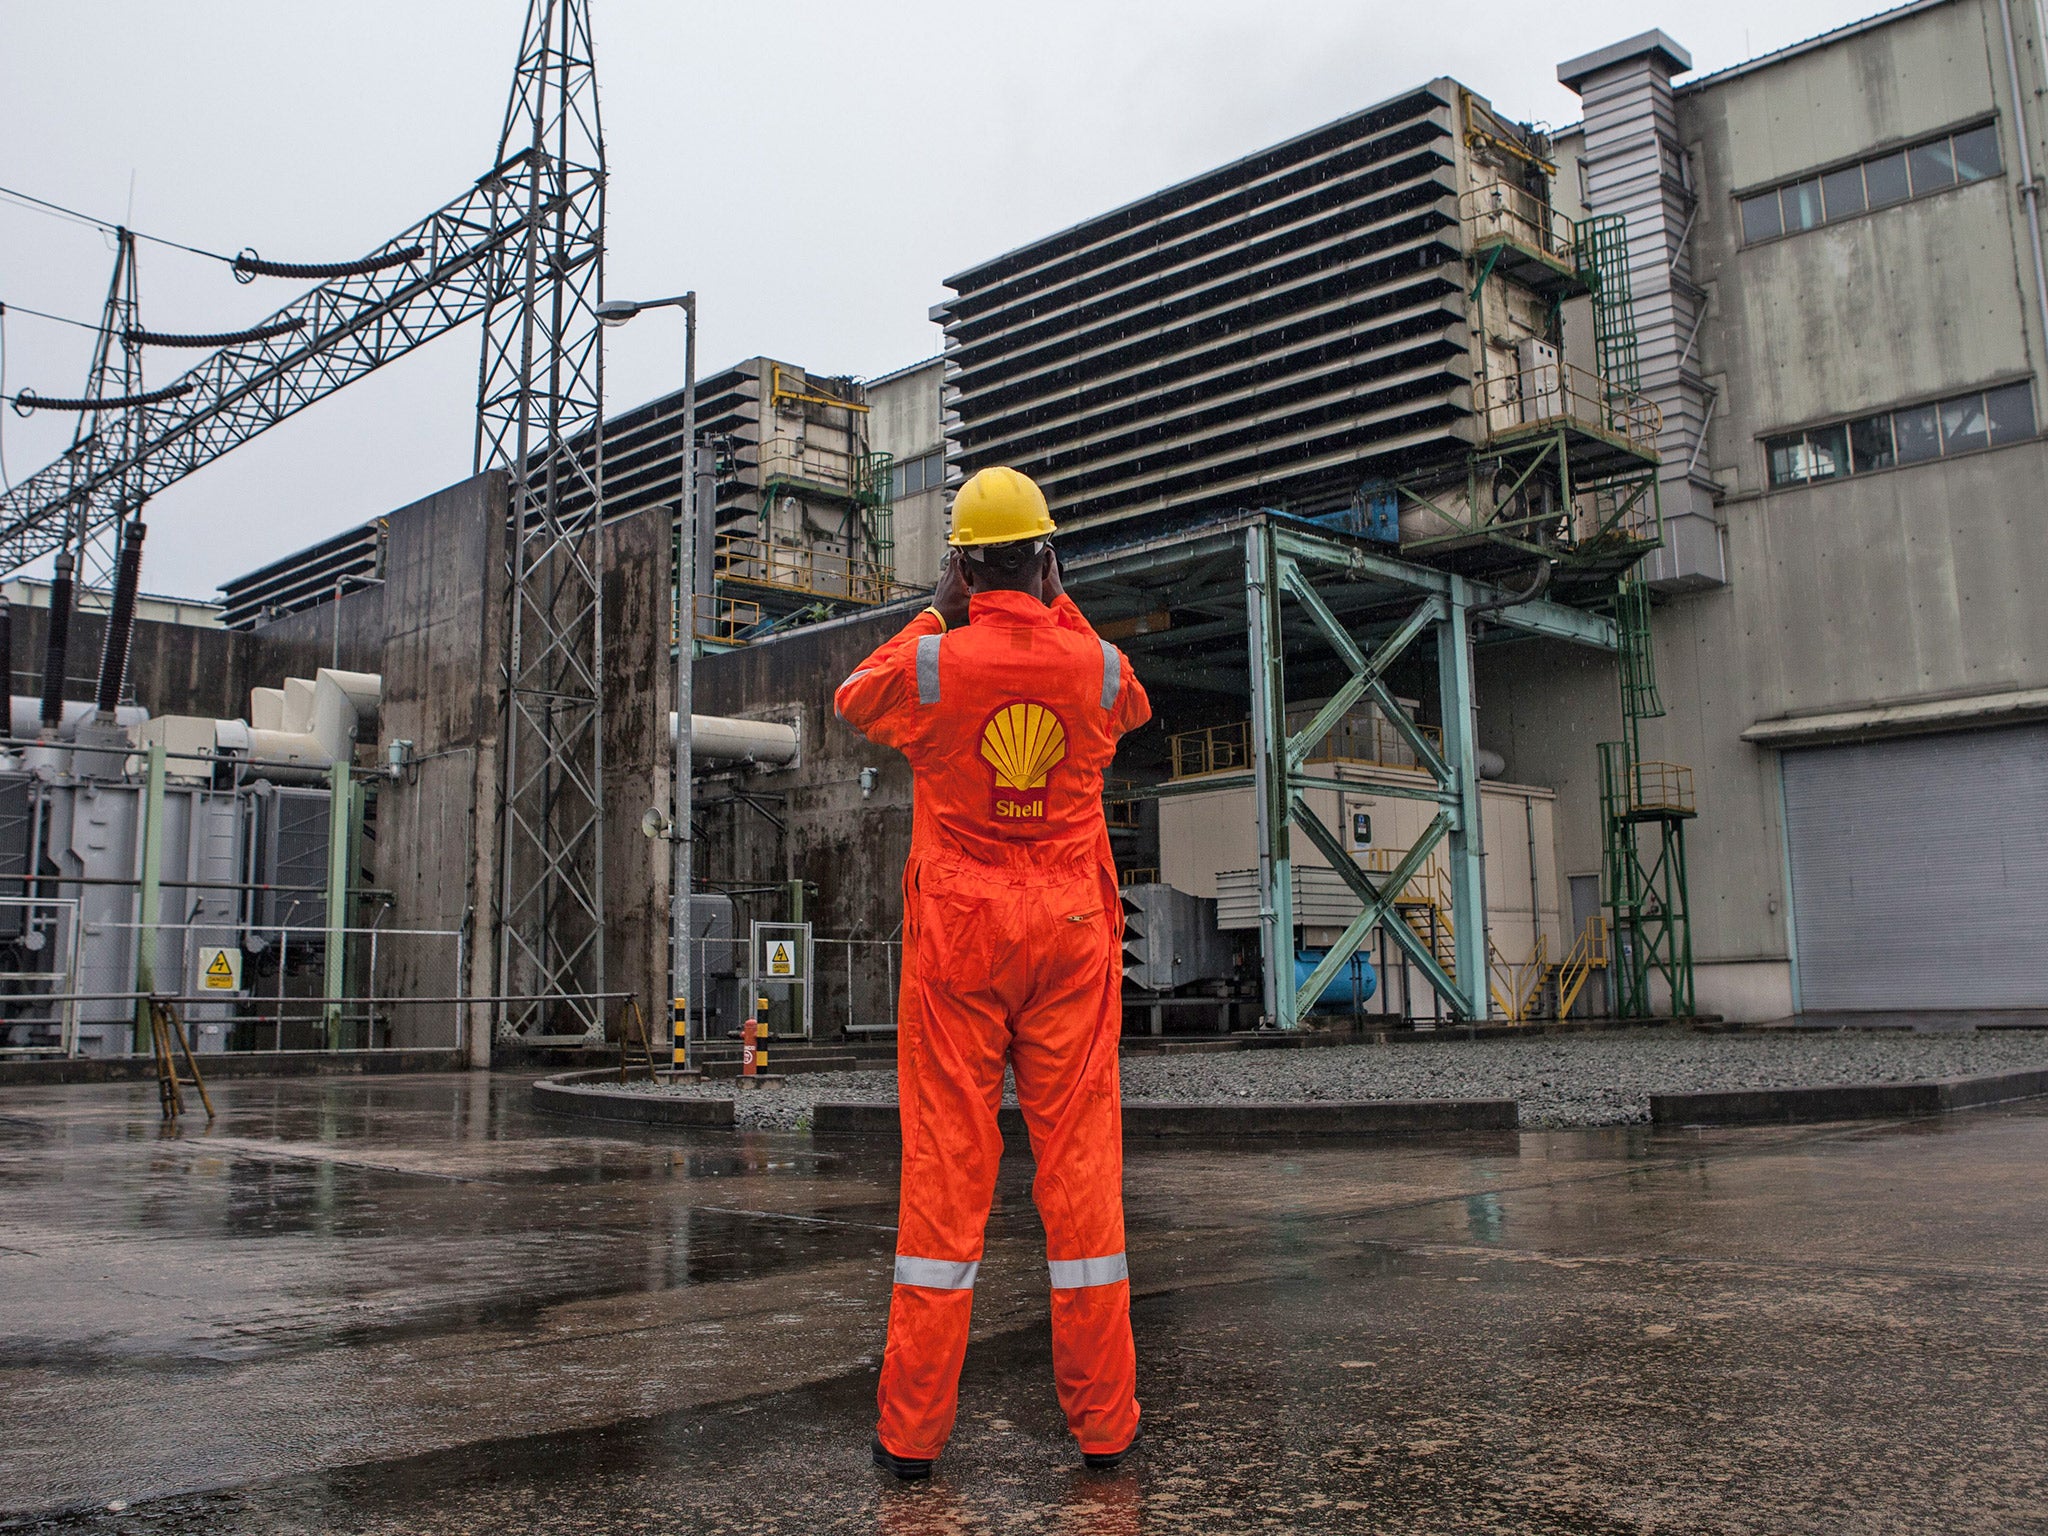 A Shell employee at a power plant in Port Harcourt, Nigeria